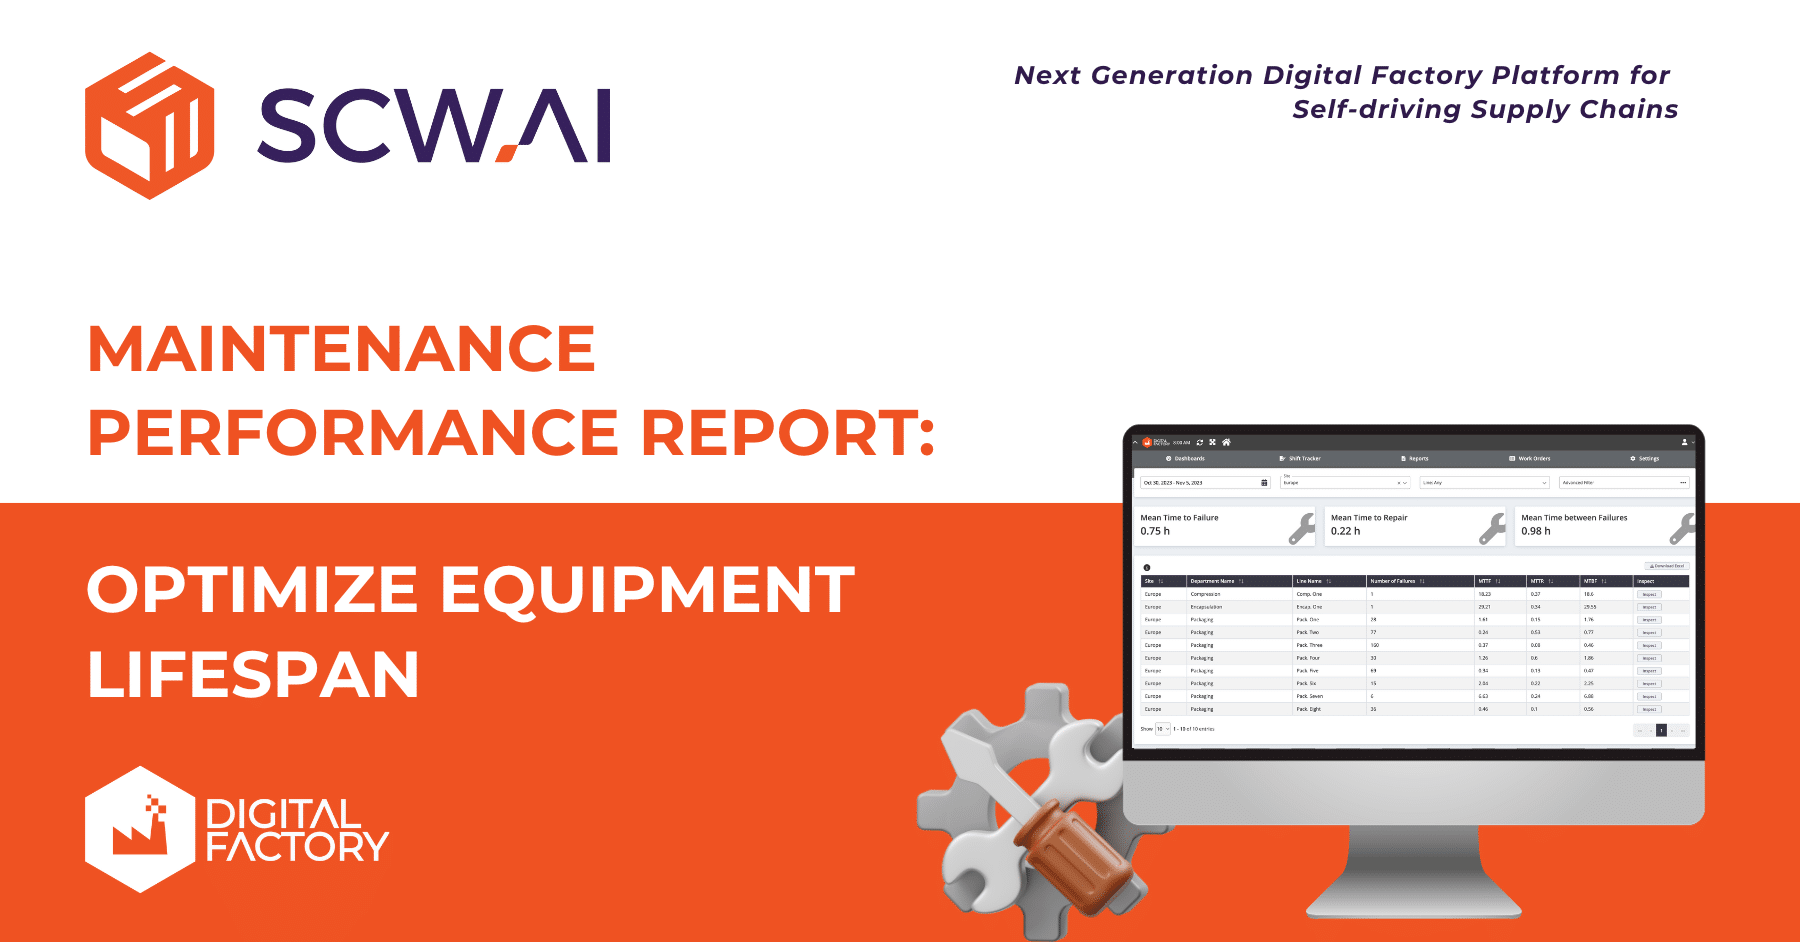 Image is the featured image of Maintenance Performance Report.